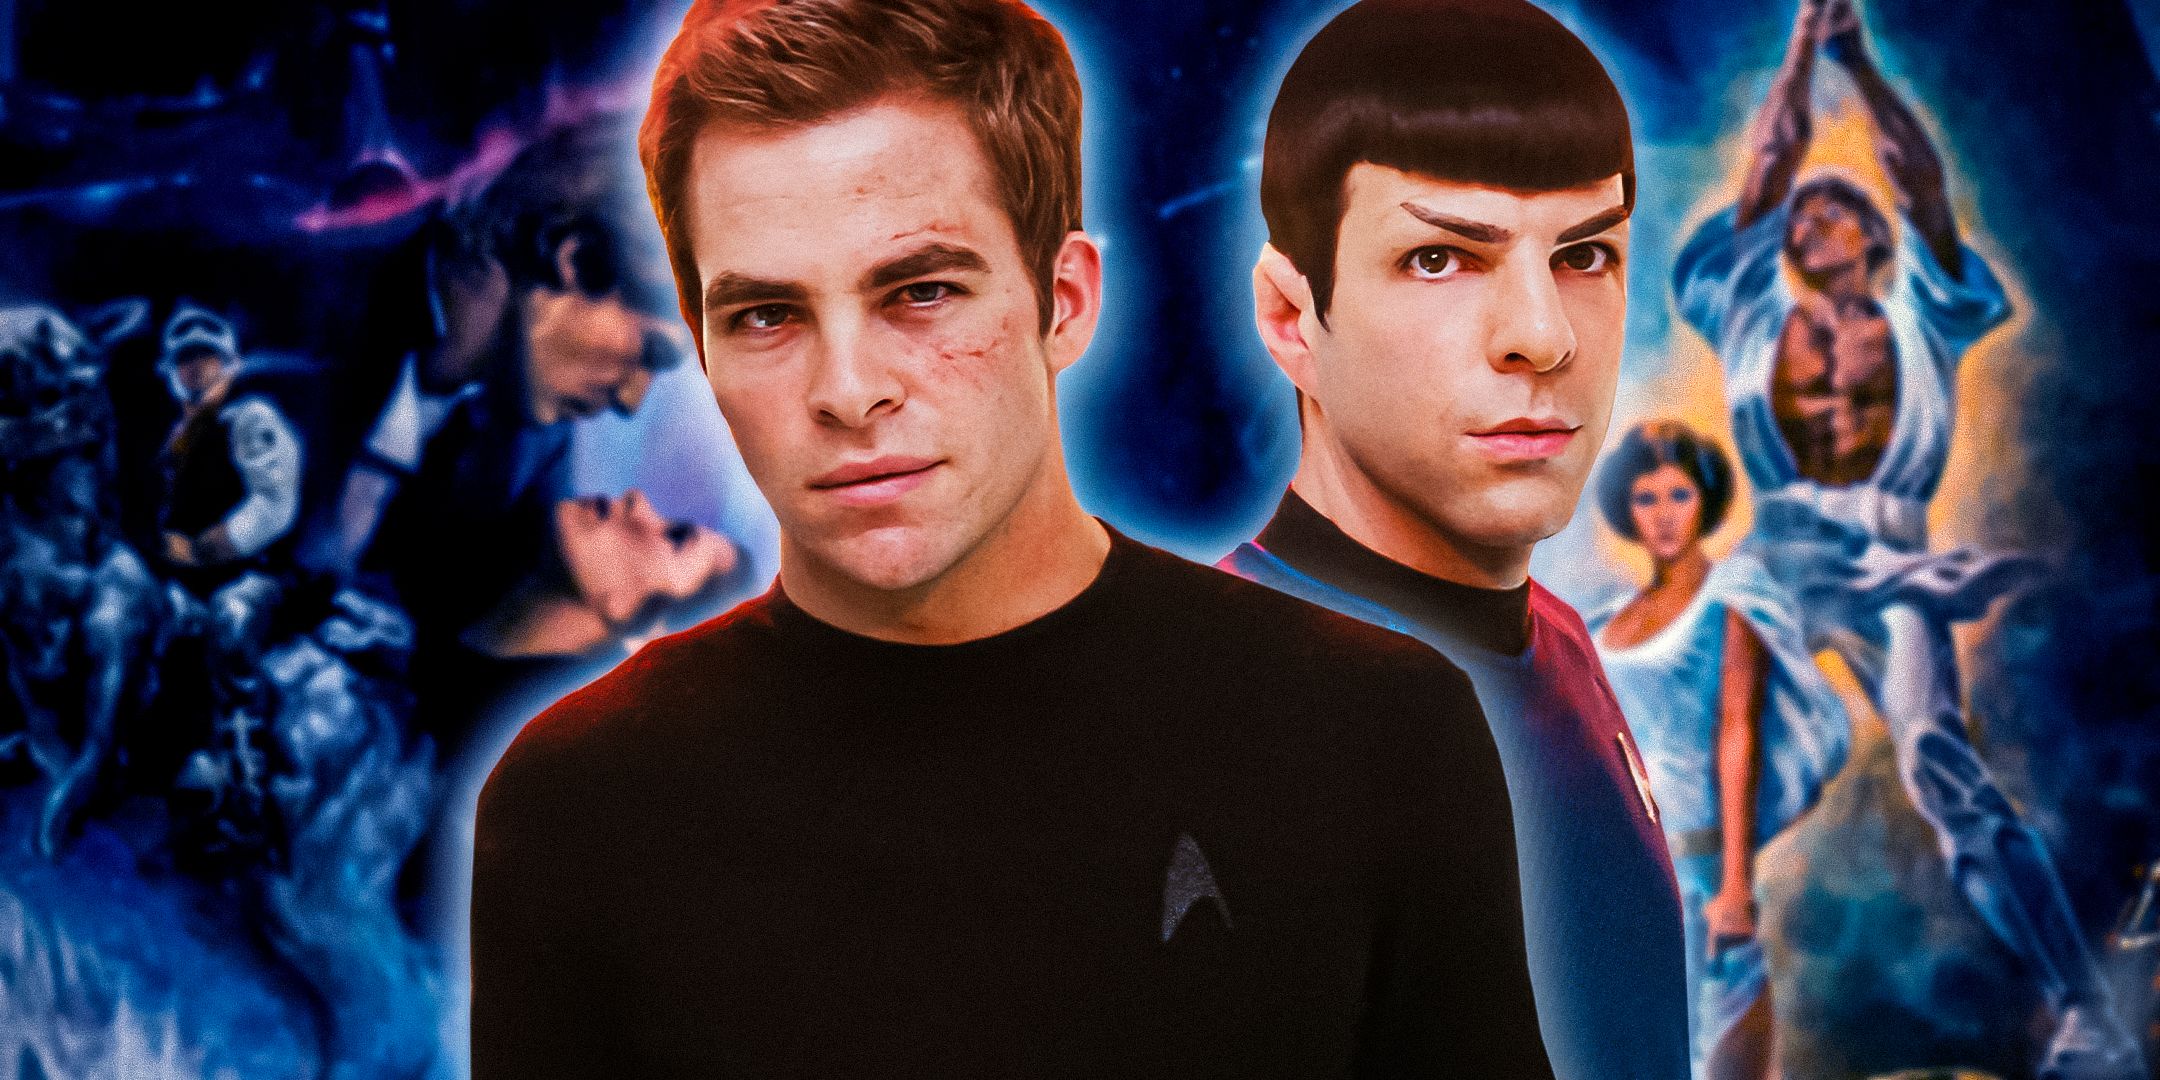 Chris Pine and Zachary Quinto as Kirk and Spock in front of posters for Star Wars and The Empire Strikes Back